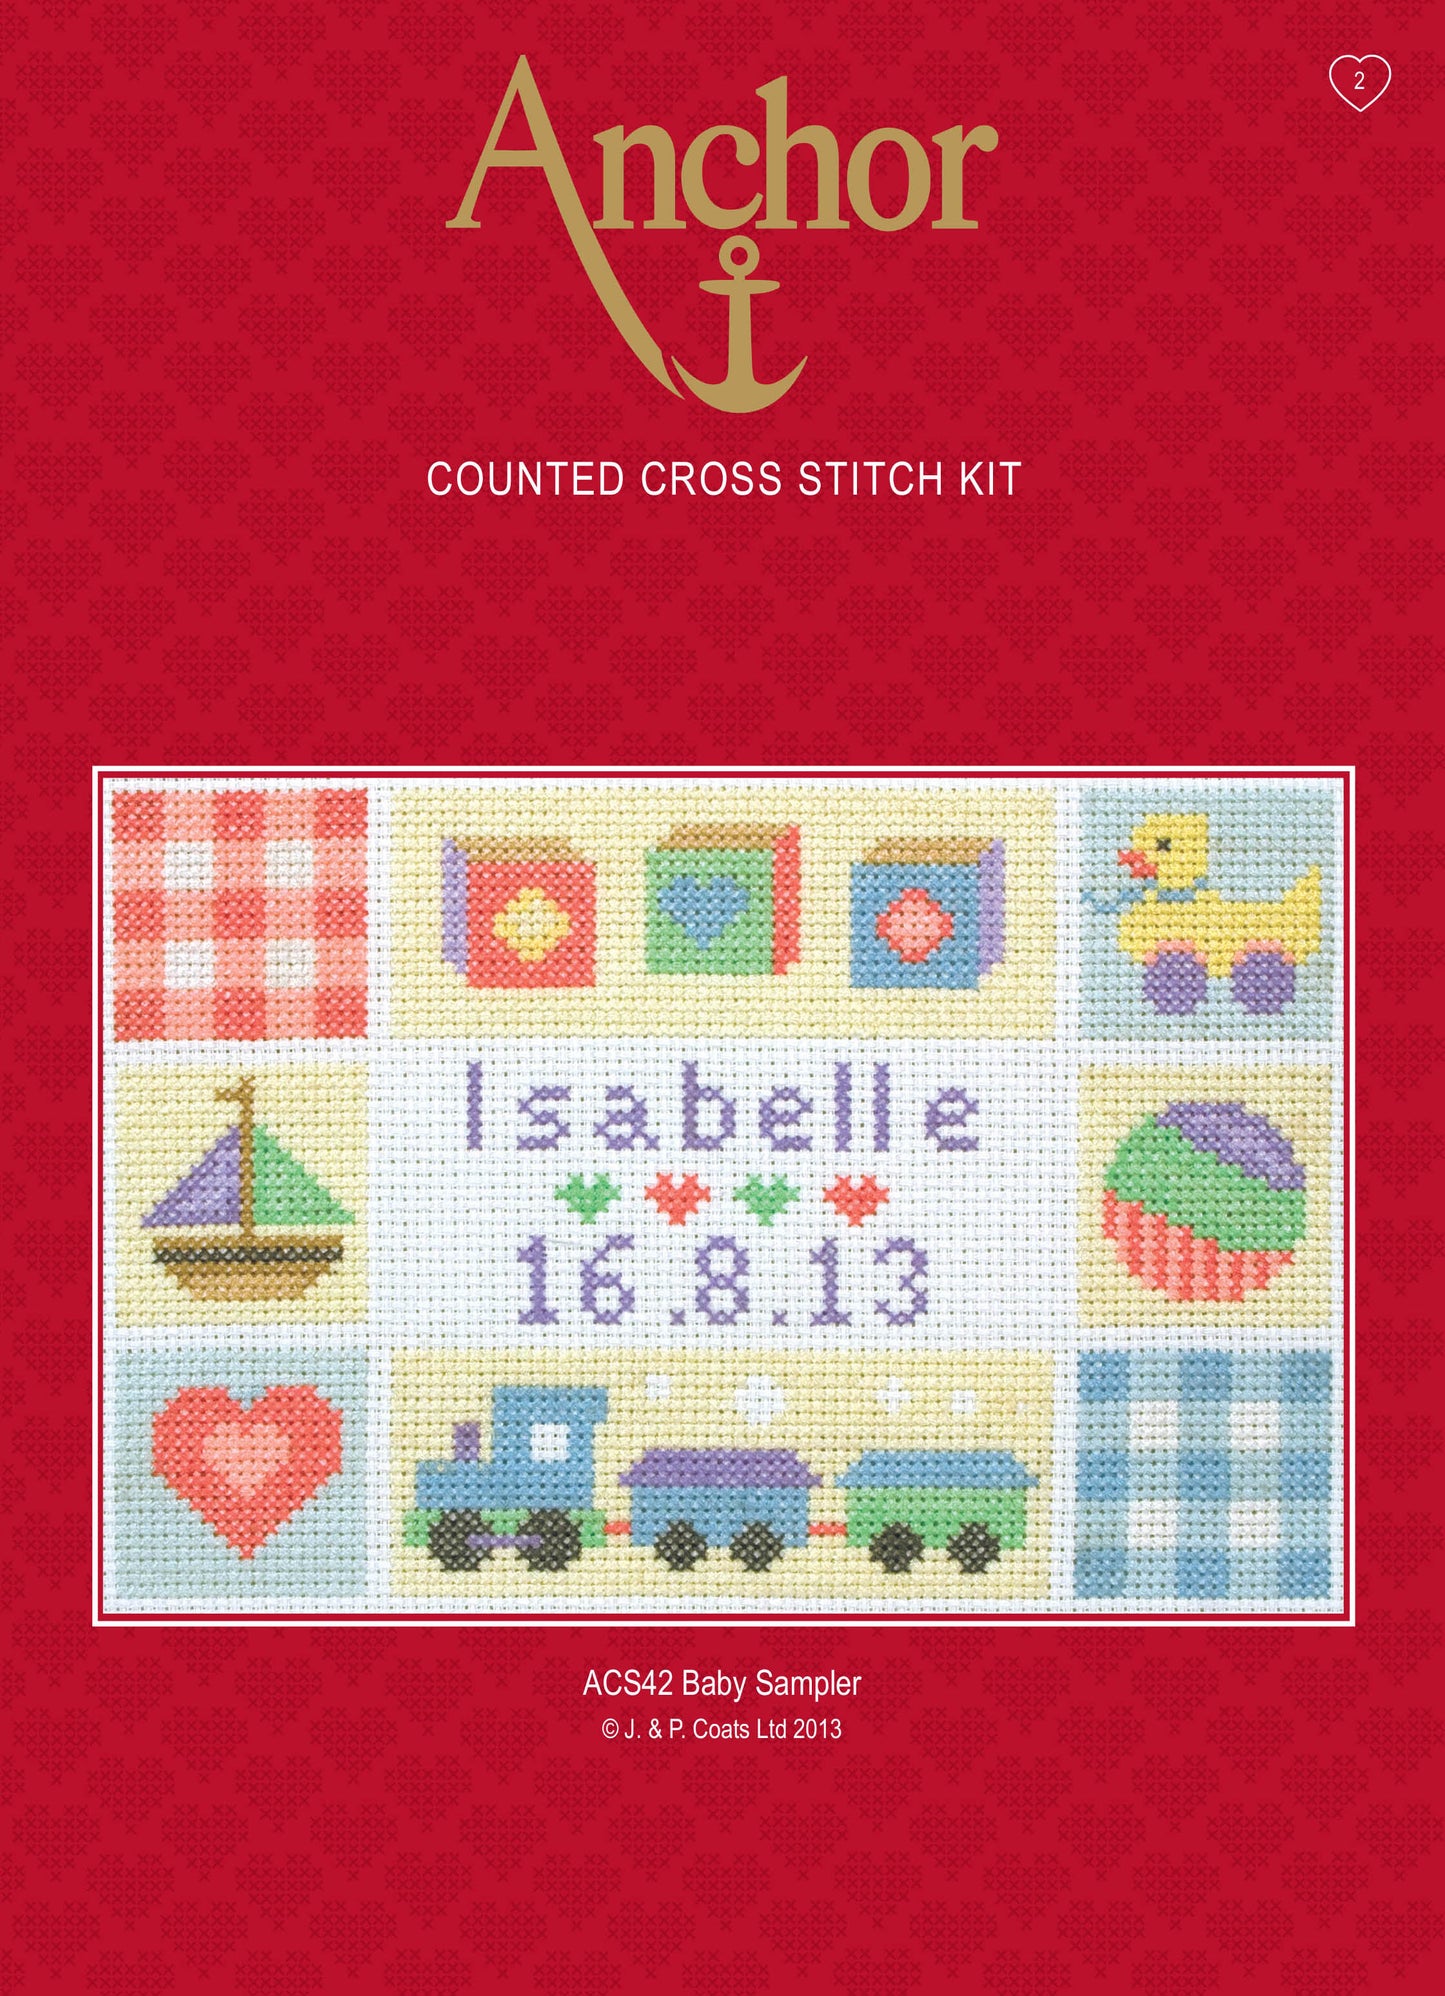 Anchor Counted Cross Stitch Kit Birth Record Baby